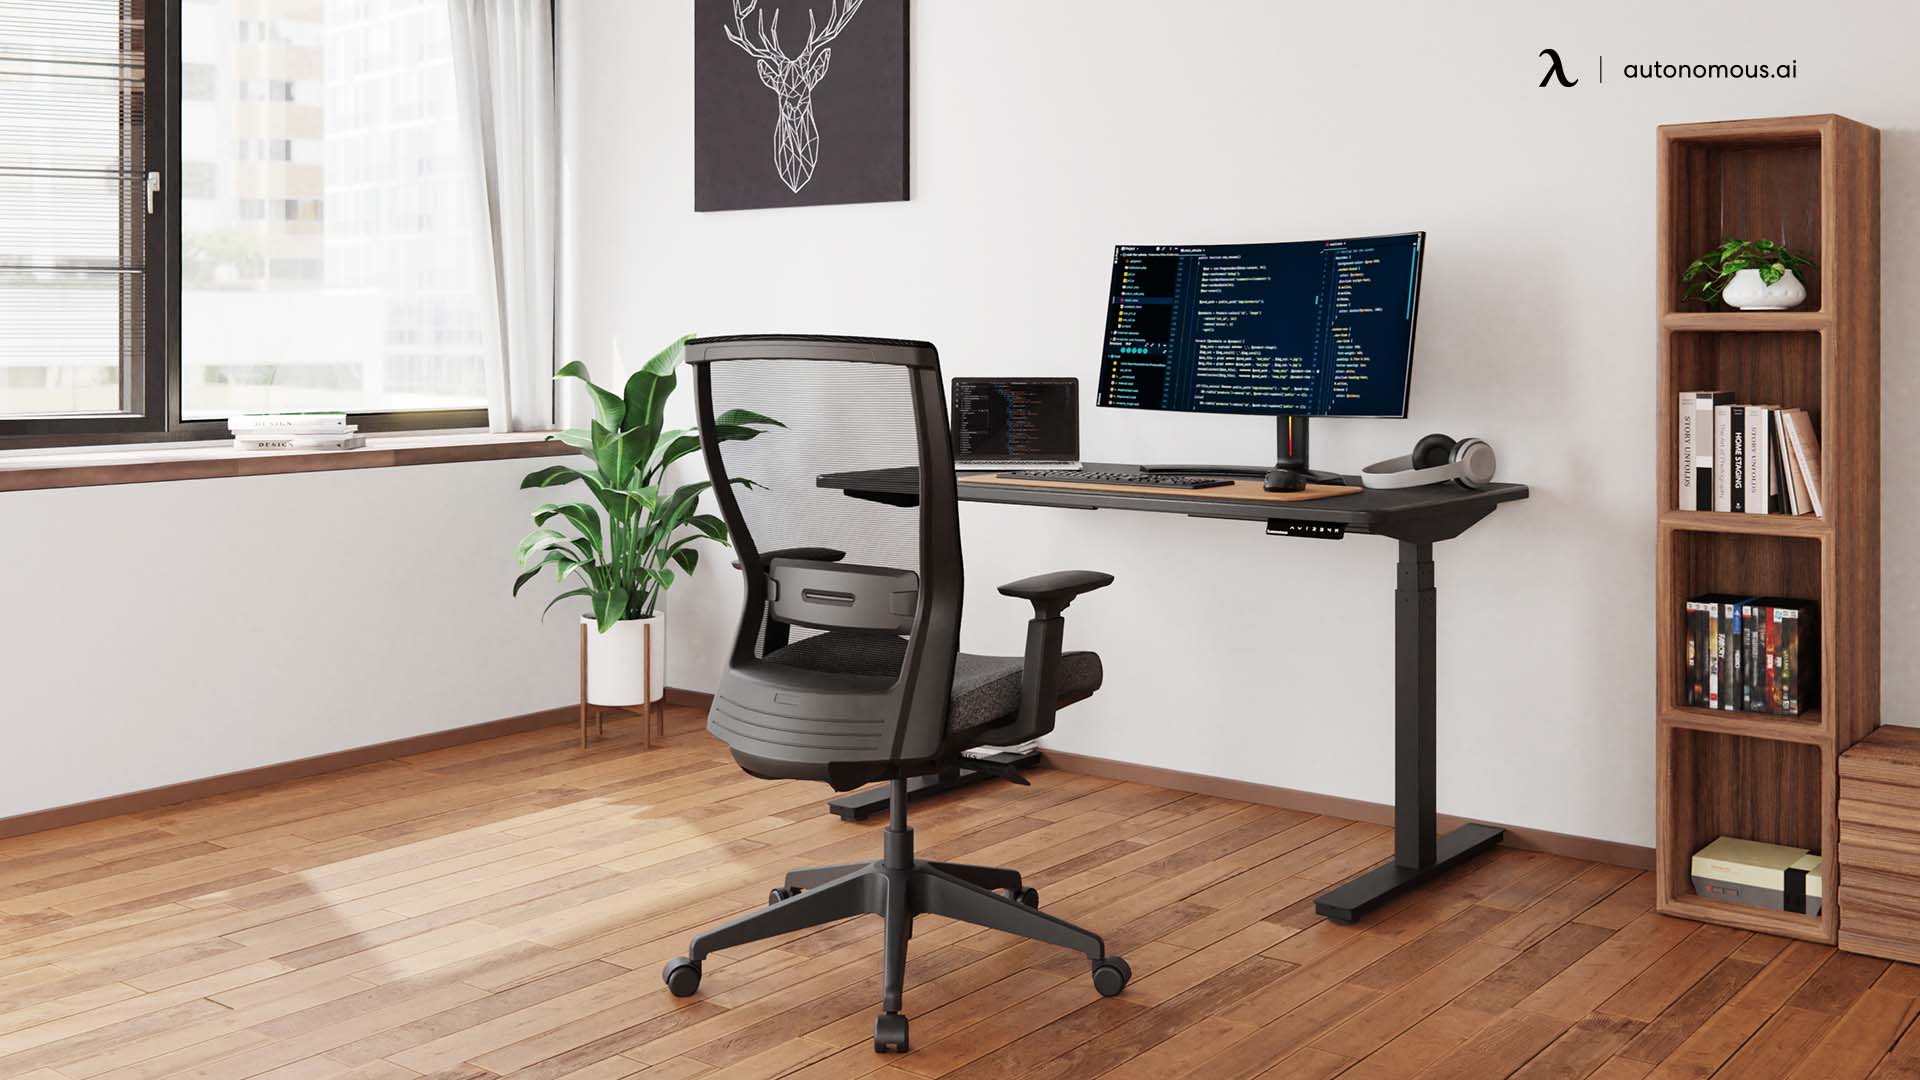 Black Friday High Chair On Sale: Top 15 Options for Standing Desks